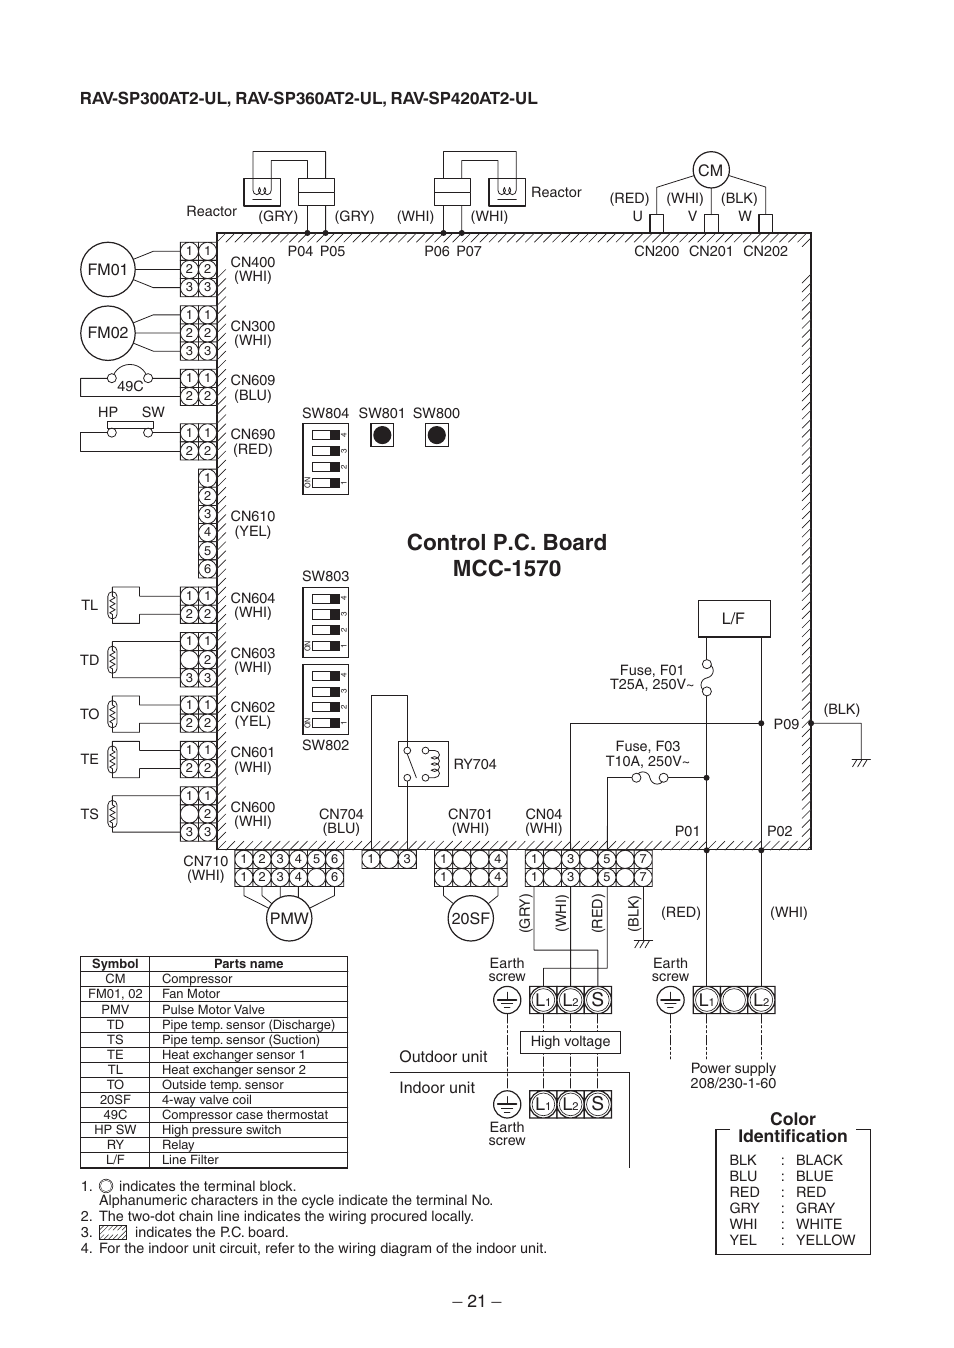 Control p.c. board mcc-1570, Color identification | Toshiba CARRIER RAV-SP300AT2-UL User Manual | Page 21 / 116